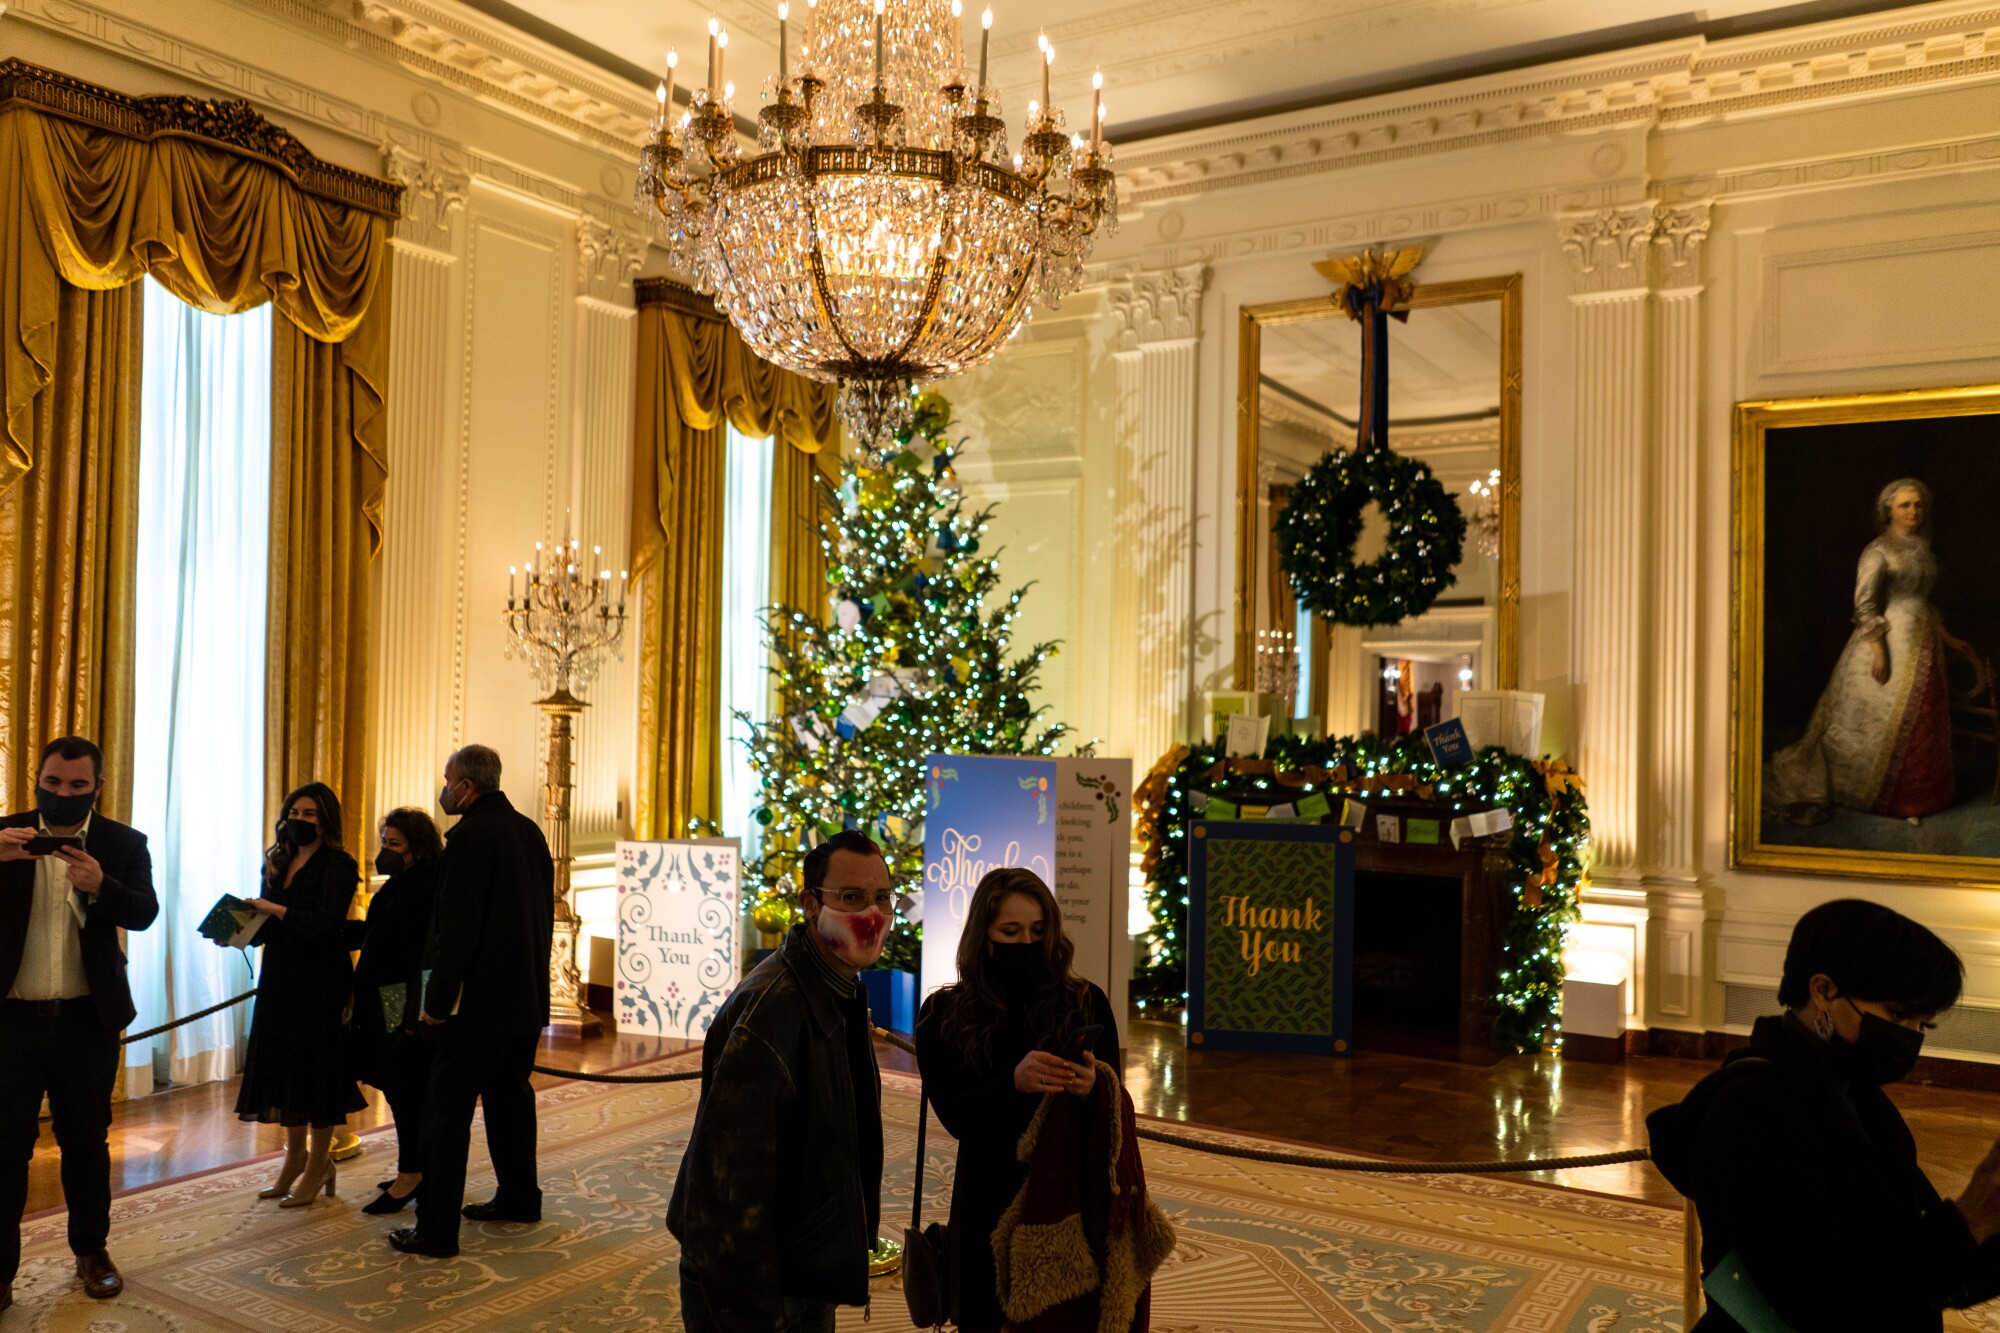 Visitors admire Christmas decorations in the East Room of the White House.